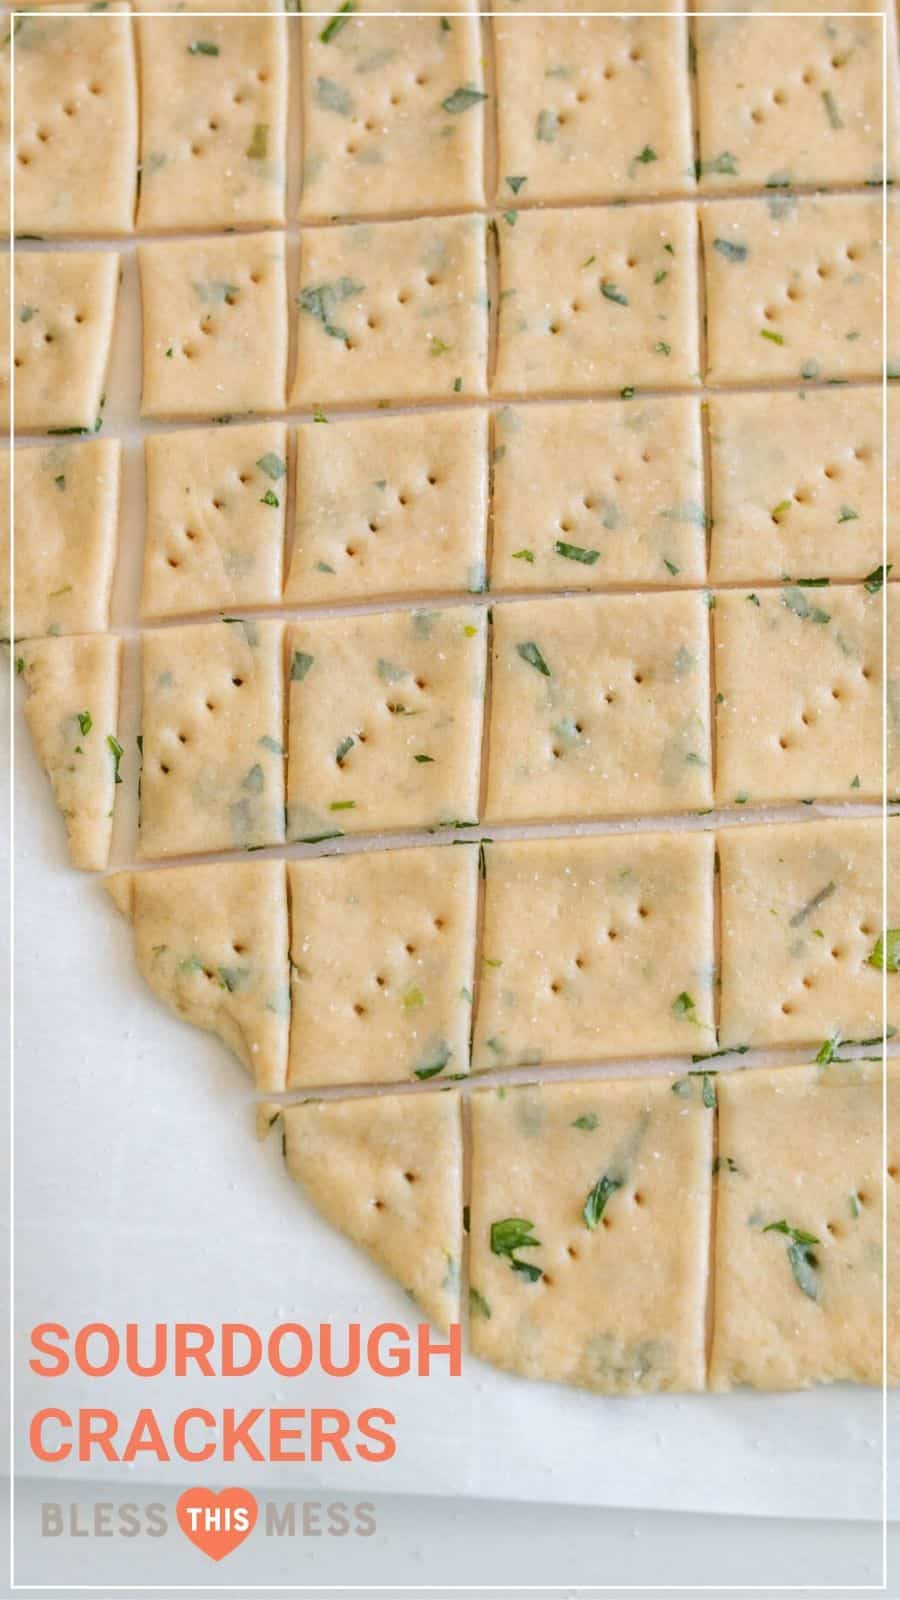 herb and garlic sour dough crackers before baking